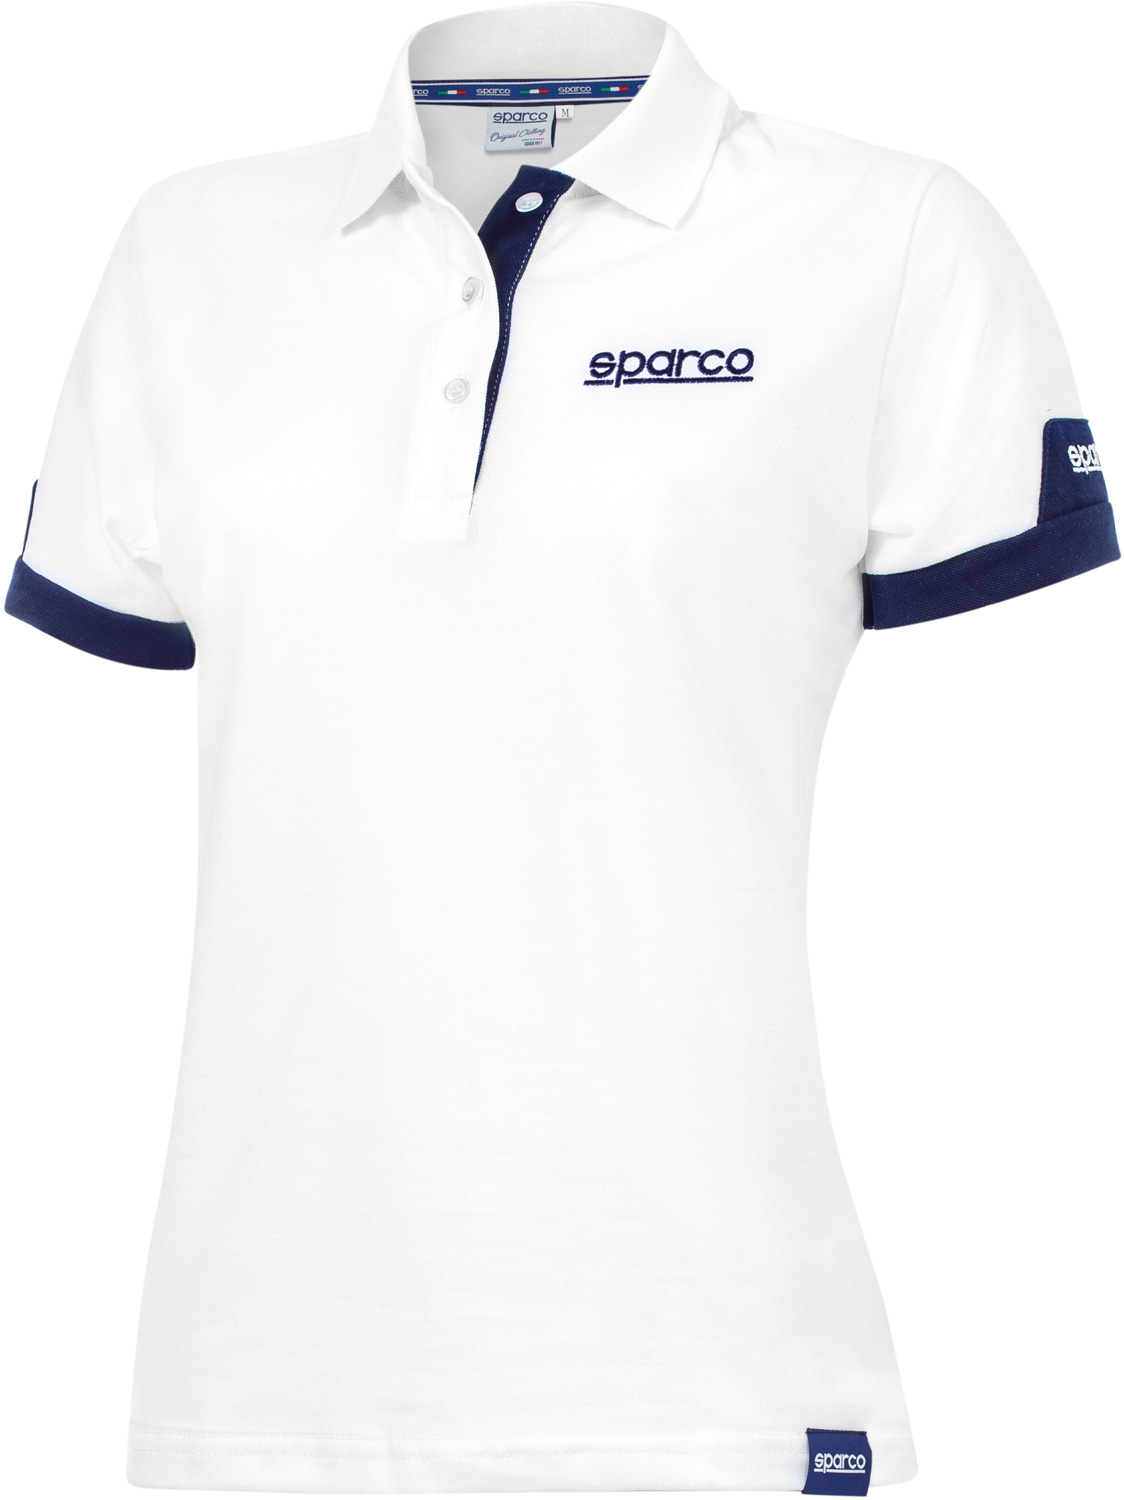 Sparco Poloshirt Corporate Lady